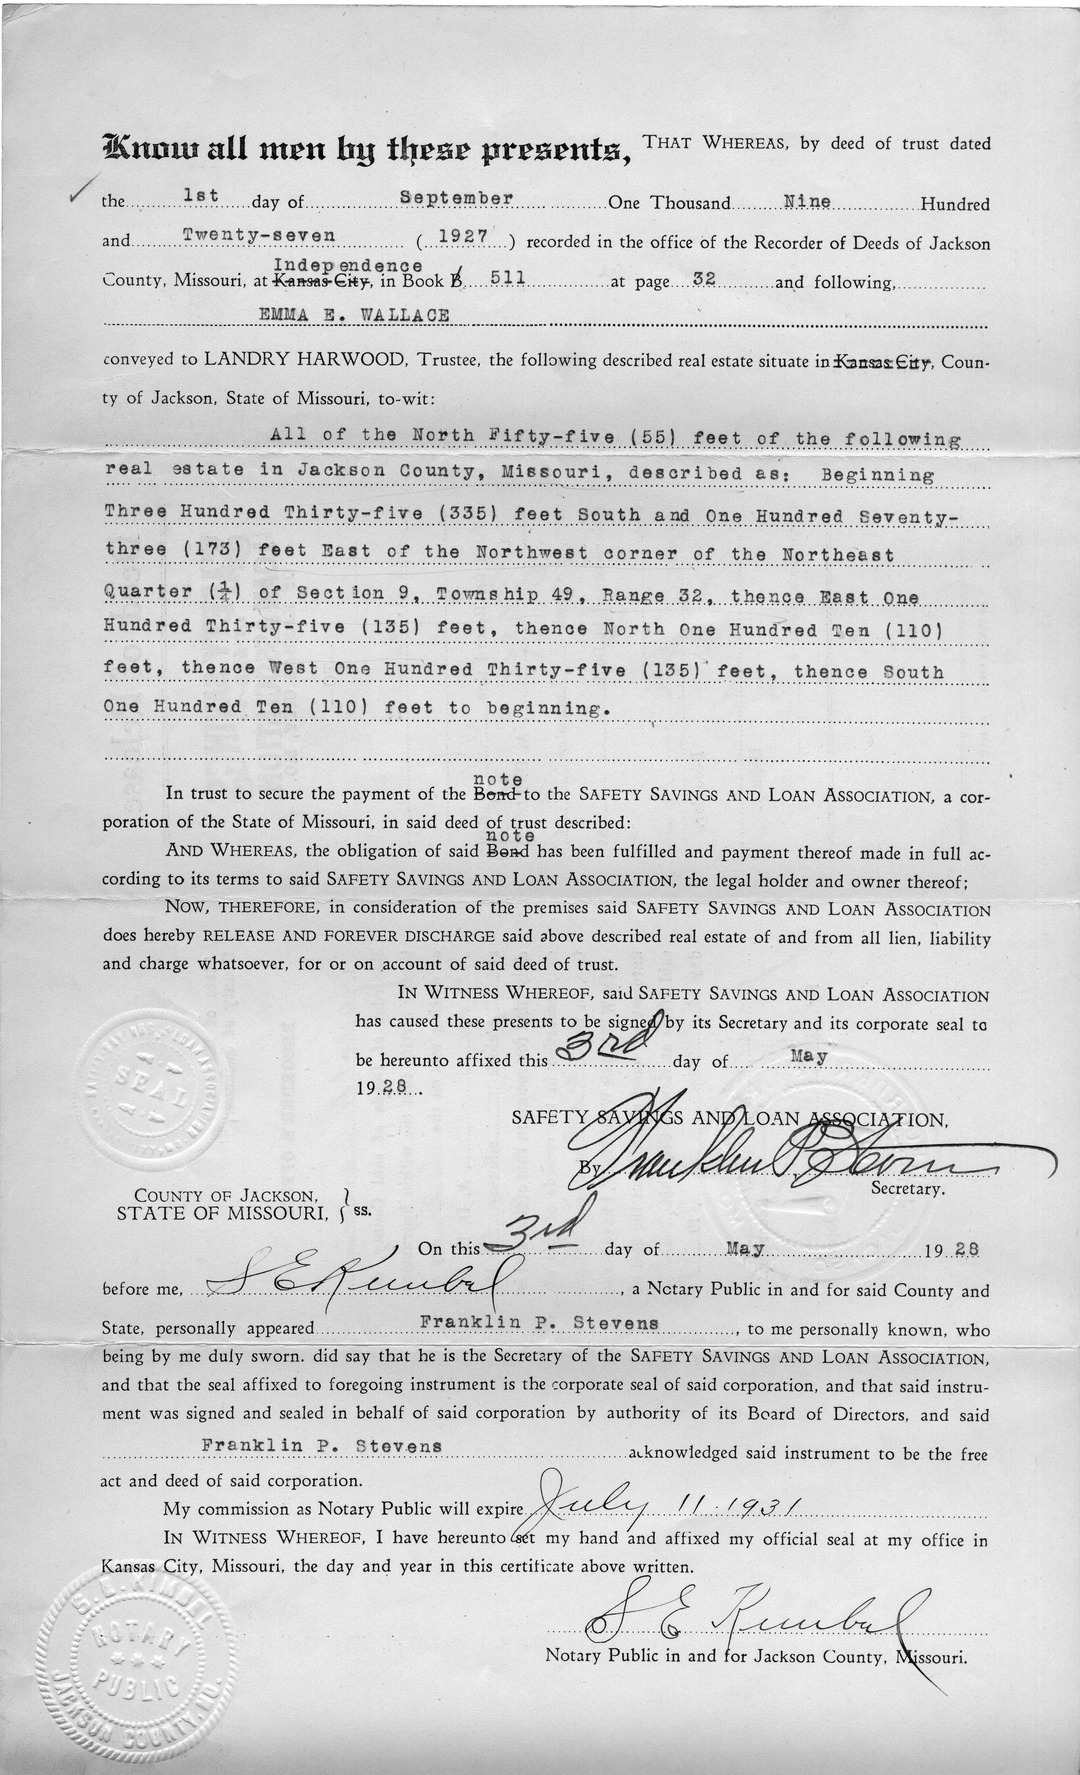 Deed of Release to Emma E. Wallace